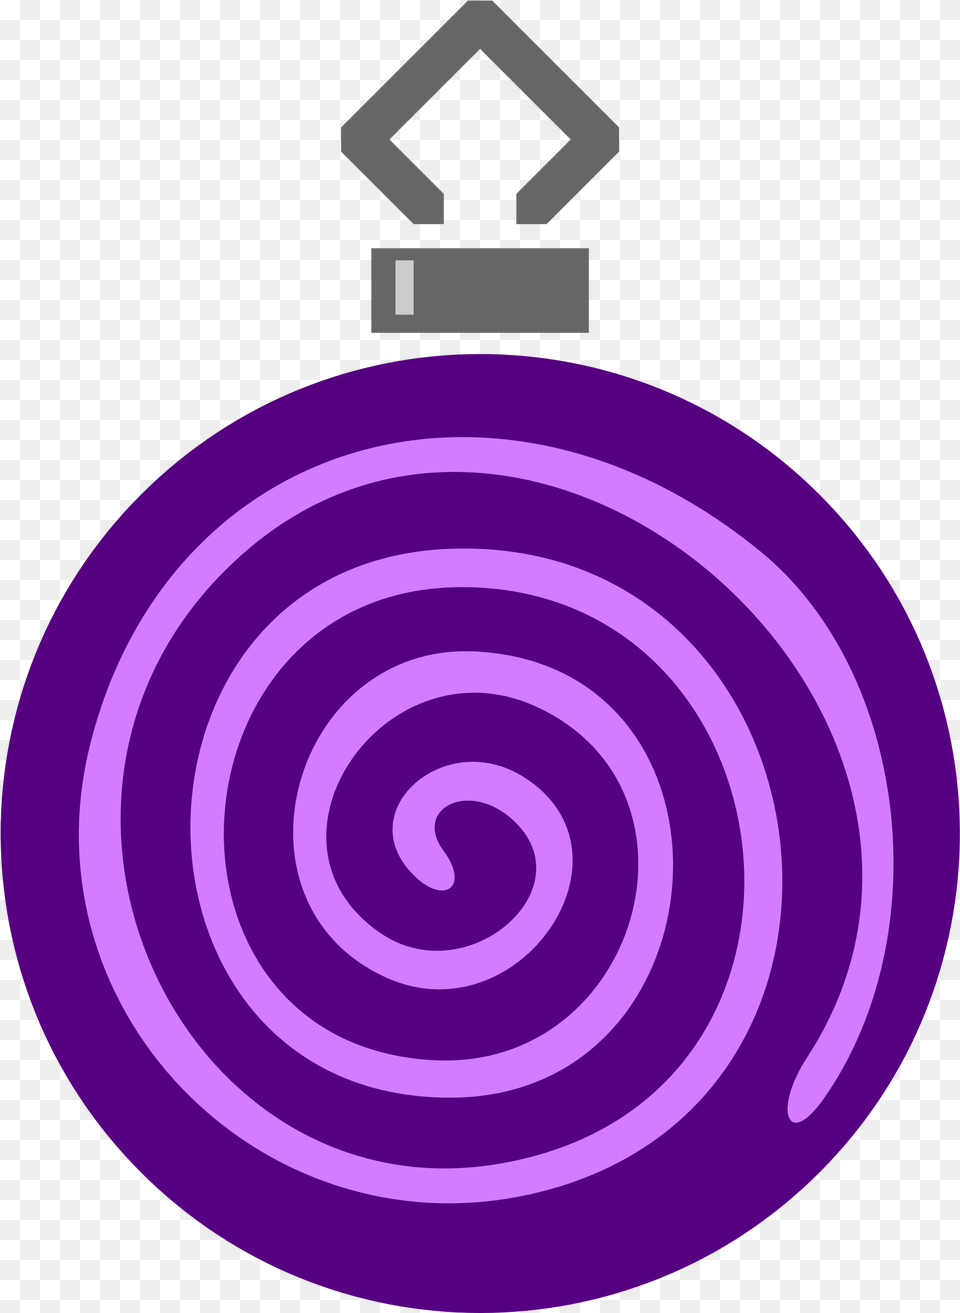 Clipart Simple Tree Bauble 8 Colour Army Ocs, Spiral, Coil Png Image